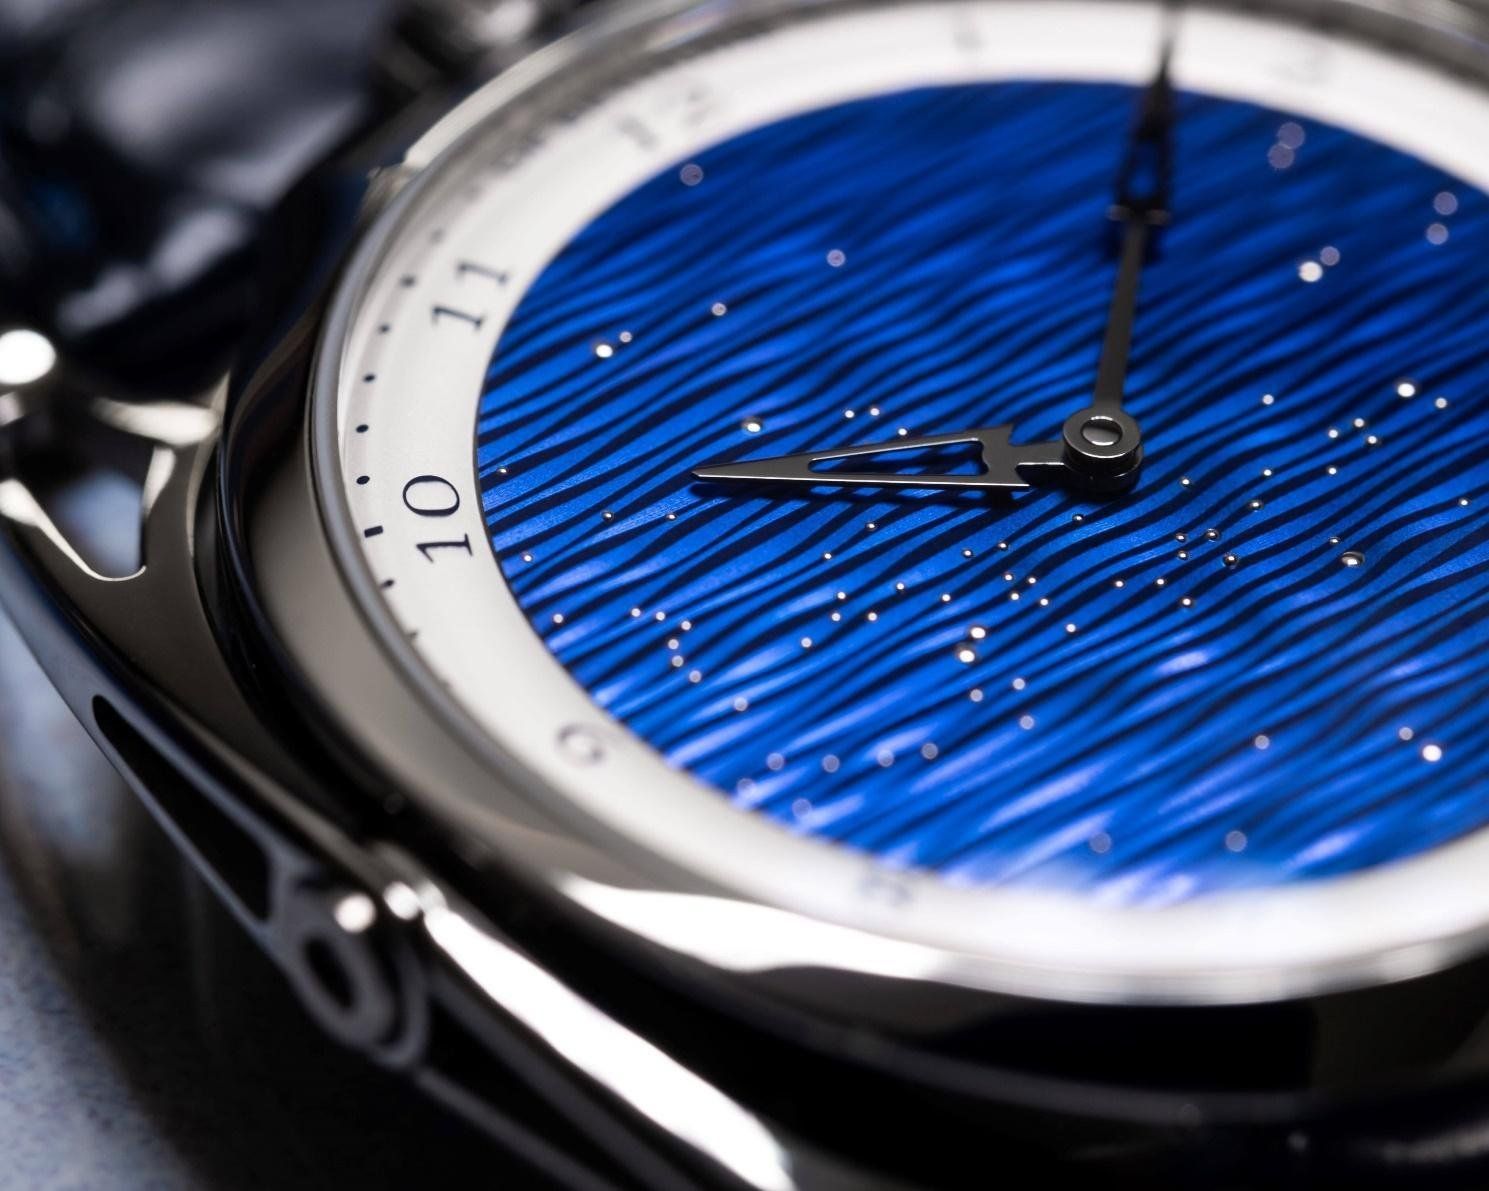 The DB28xs Starry Seas features the world’s first random guilloche pattern on its dial